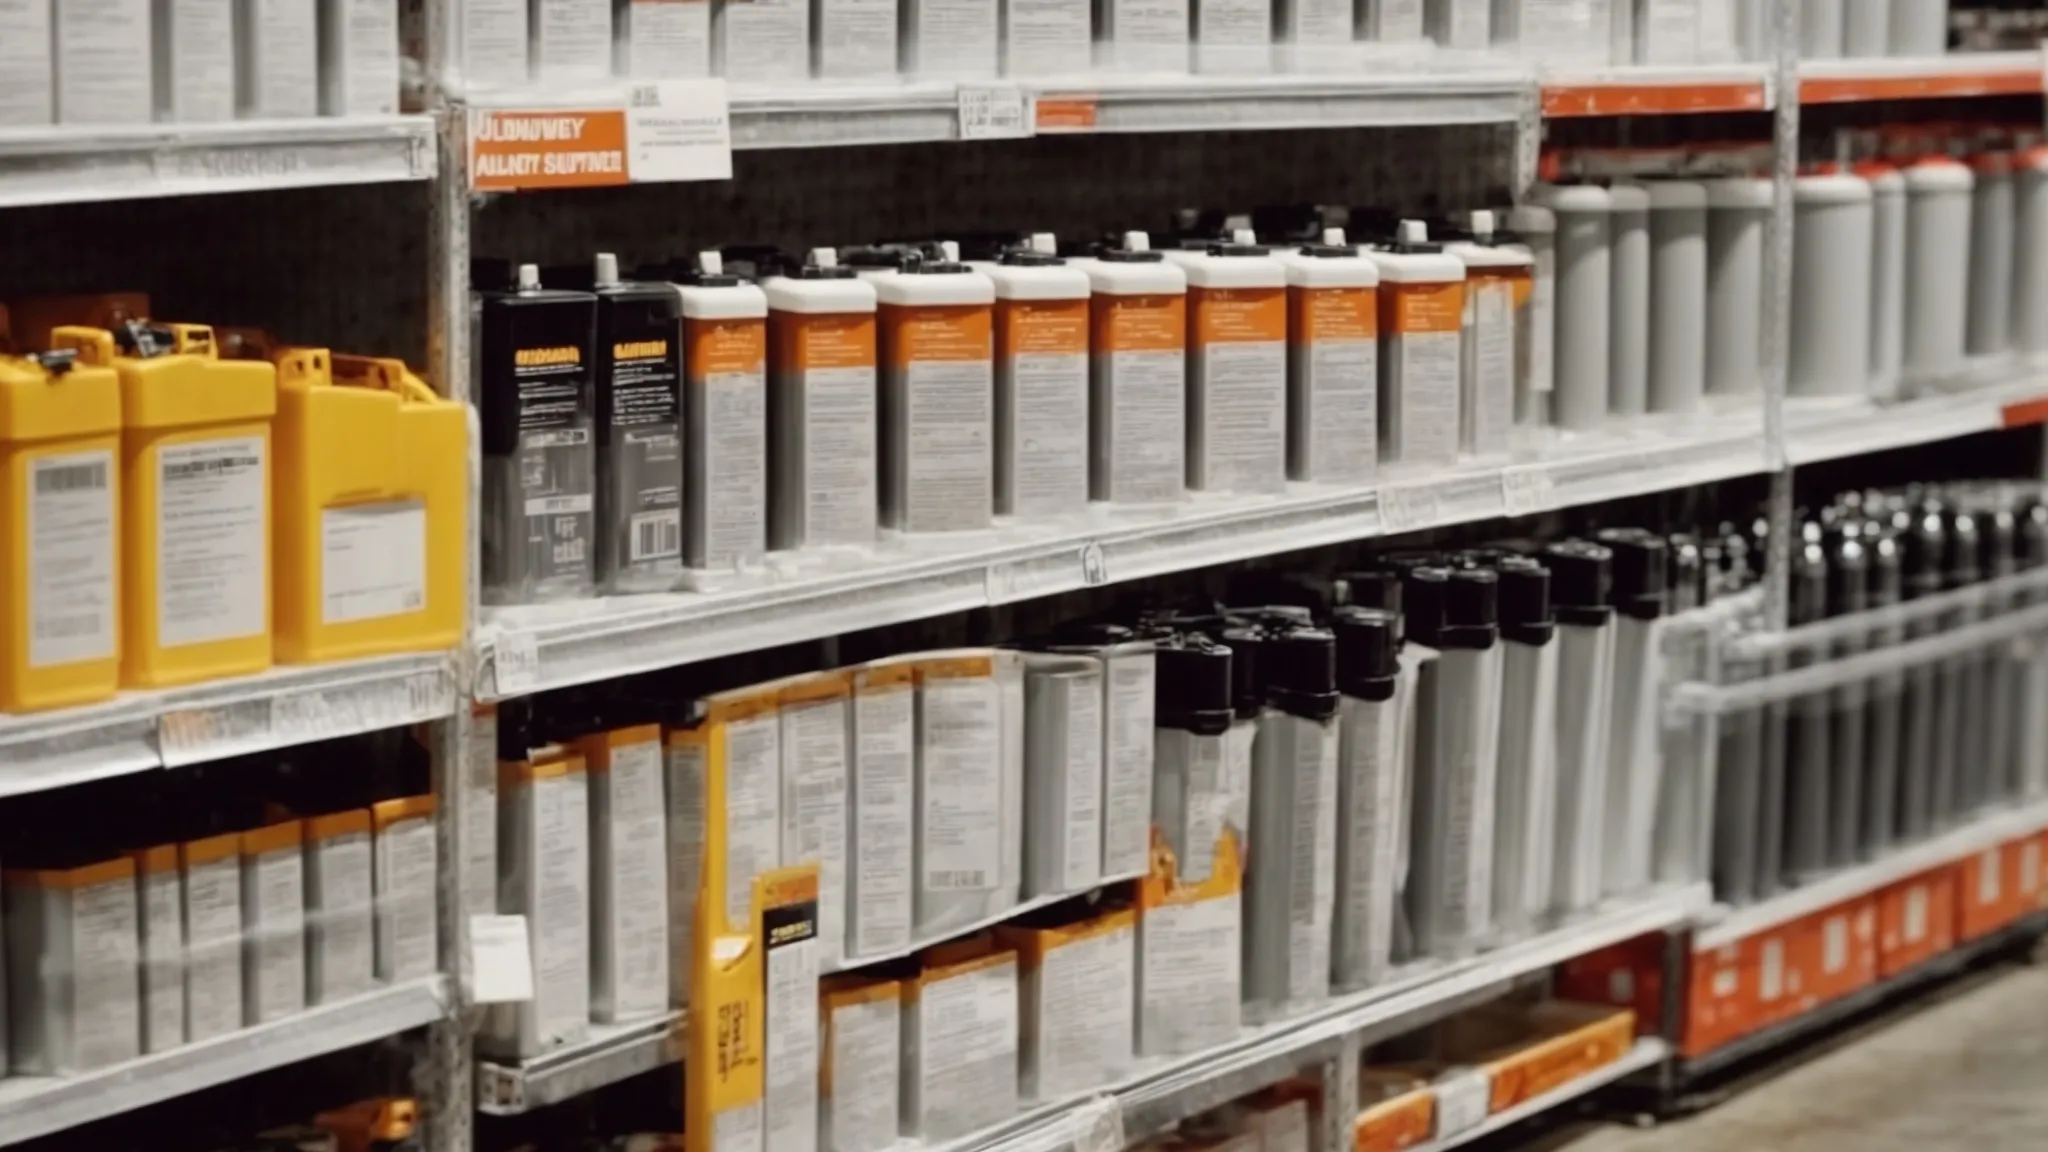 a row of heavy-duty sump pump battery backups lines the shelf in a spacious, well-lit hardware store aisle.